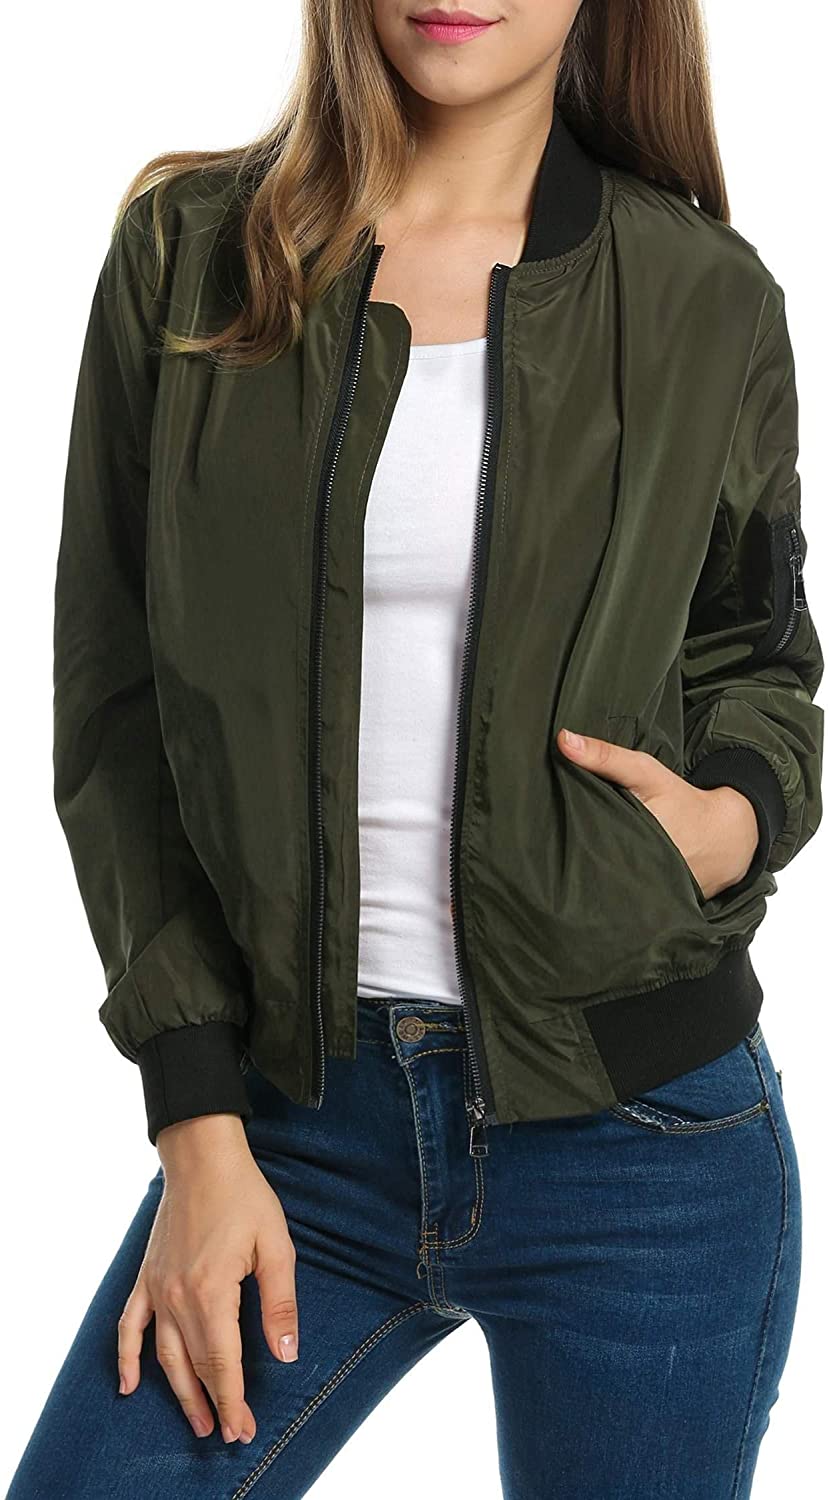  Kcocoo Womens Lightweight Jackets Casual Bomber Jacket